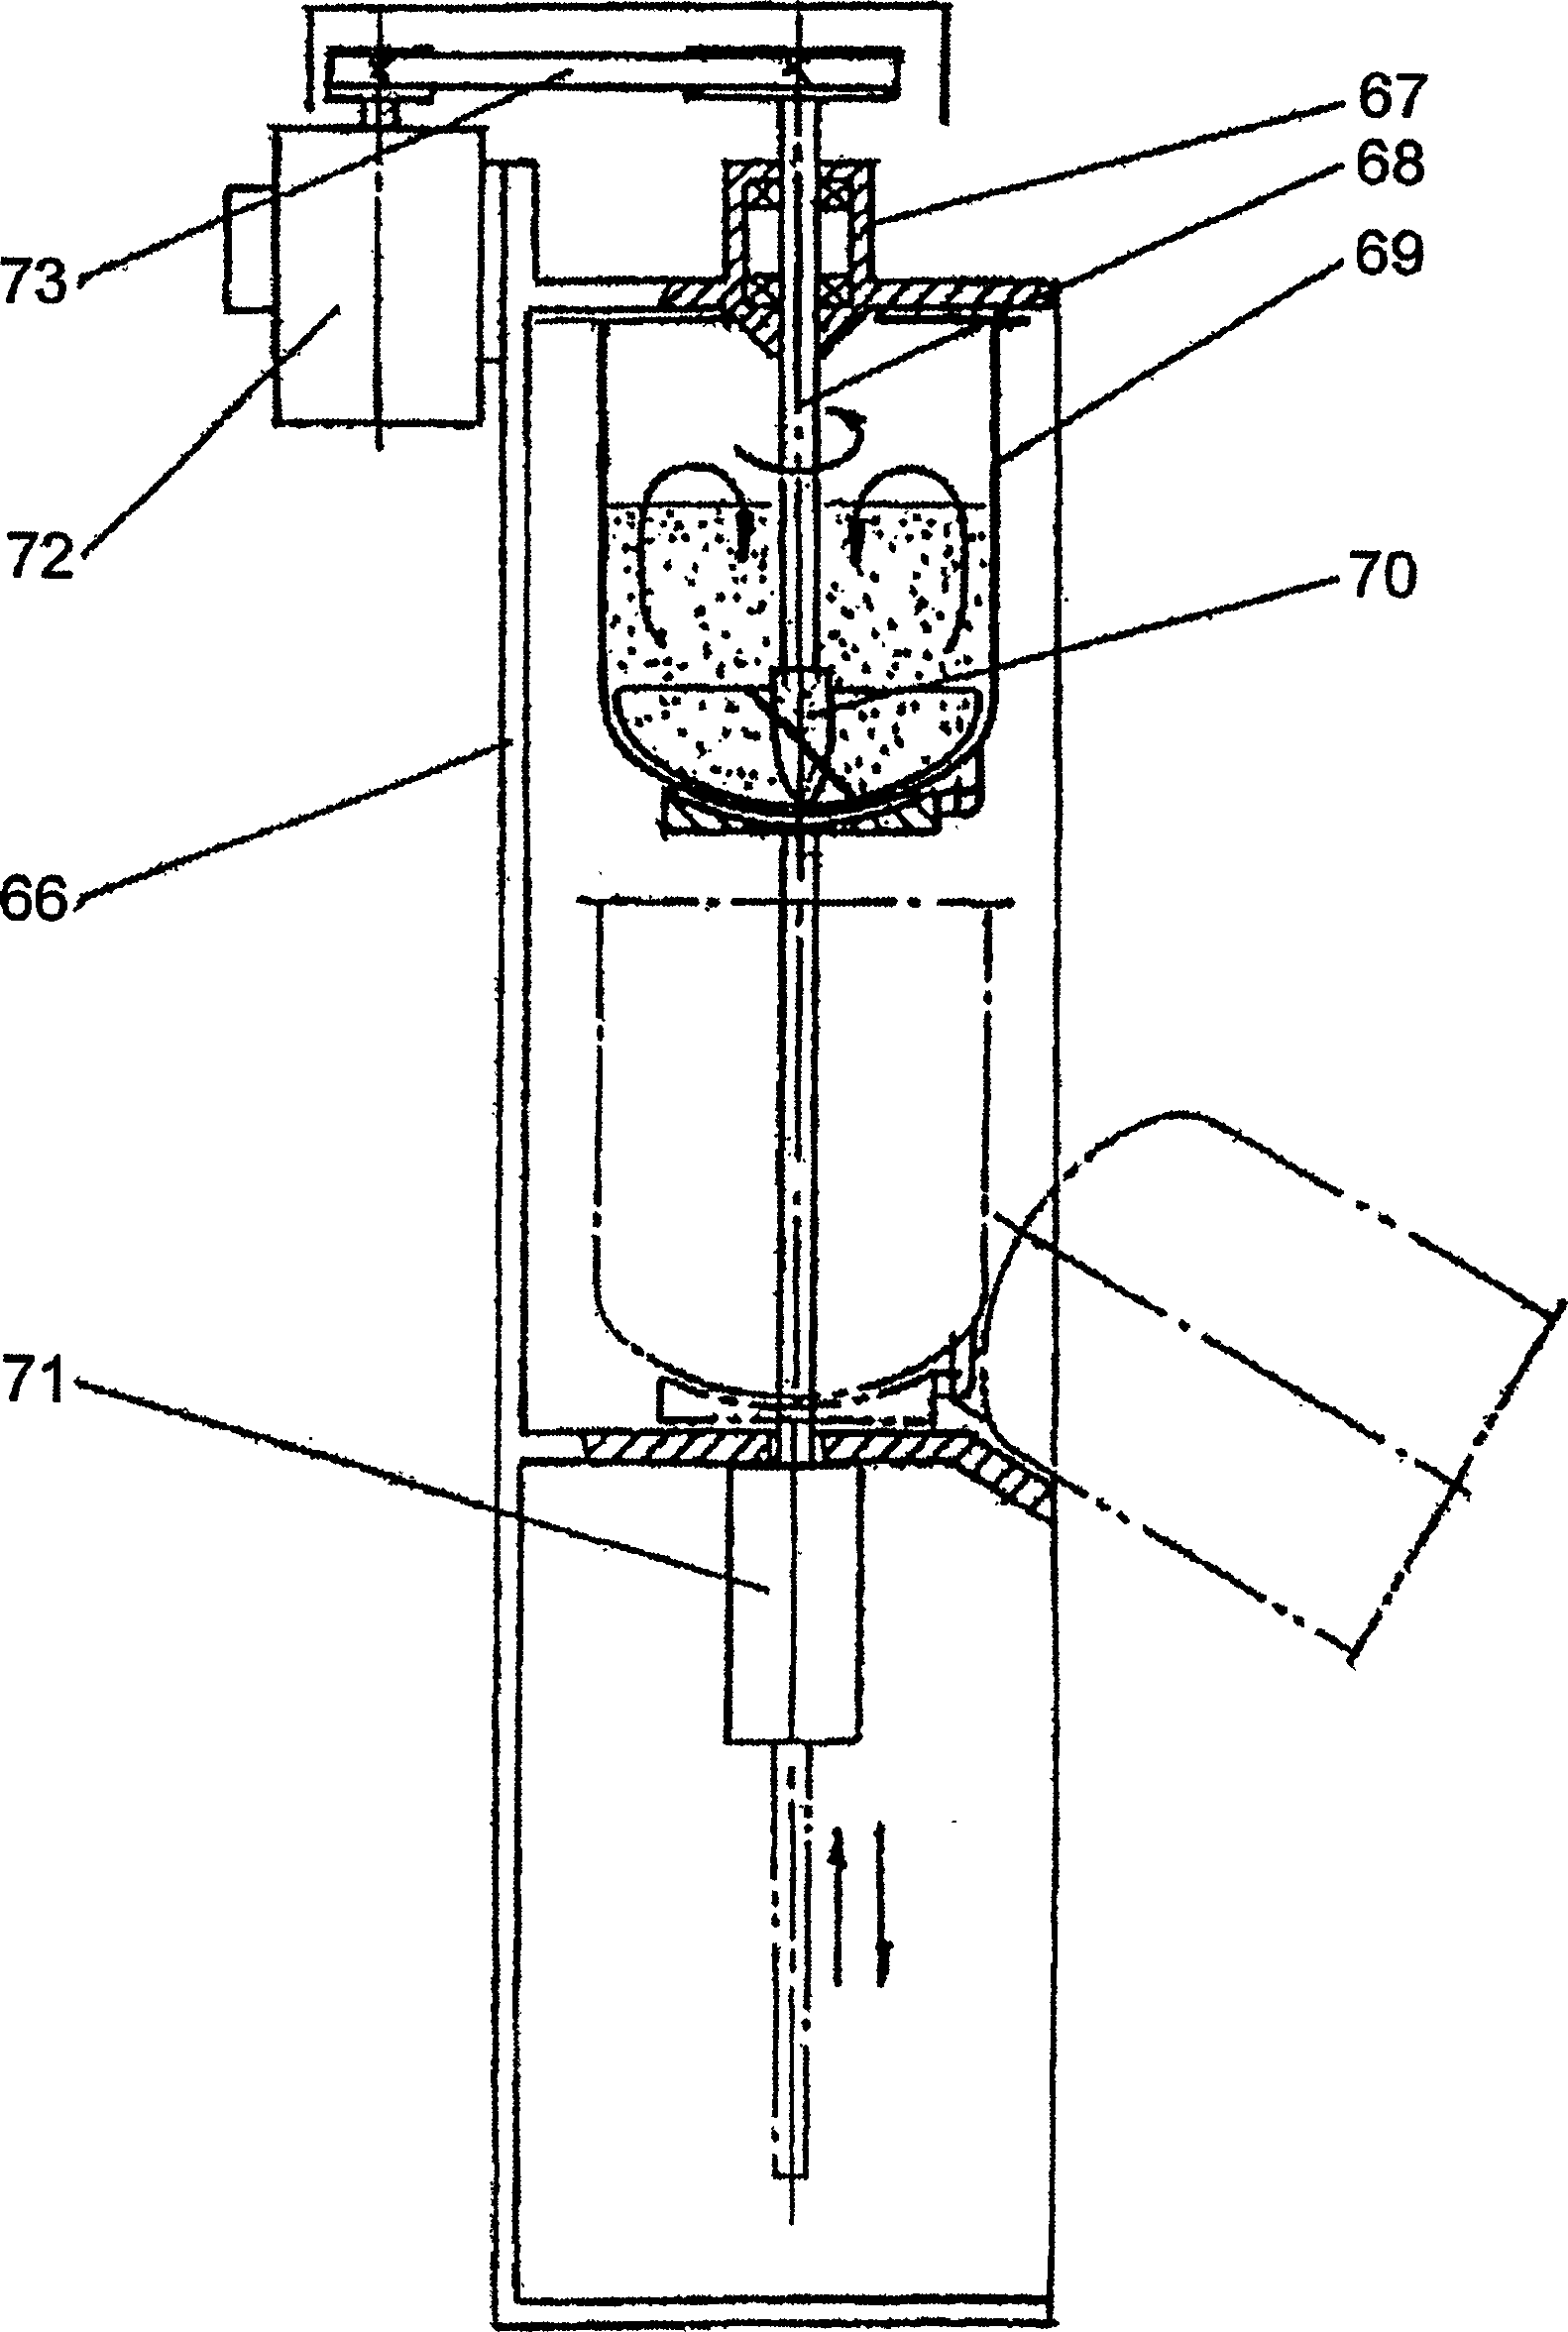 Method for producing granulated sorbents and installation for carrying out the method